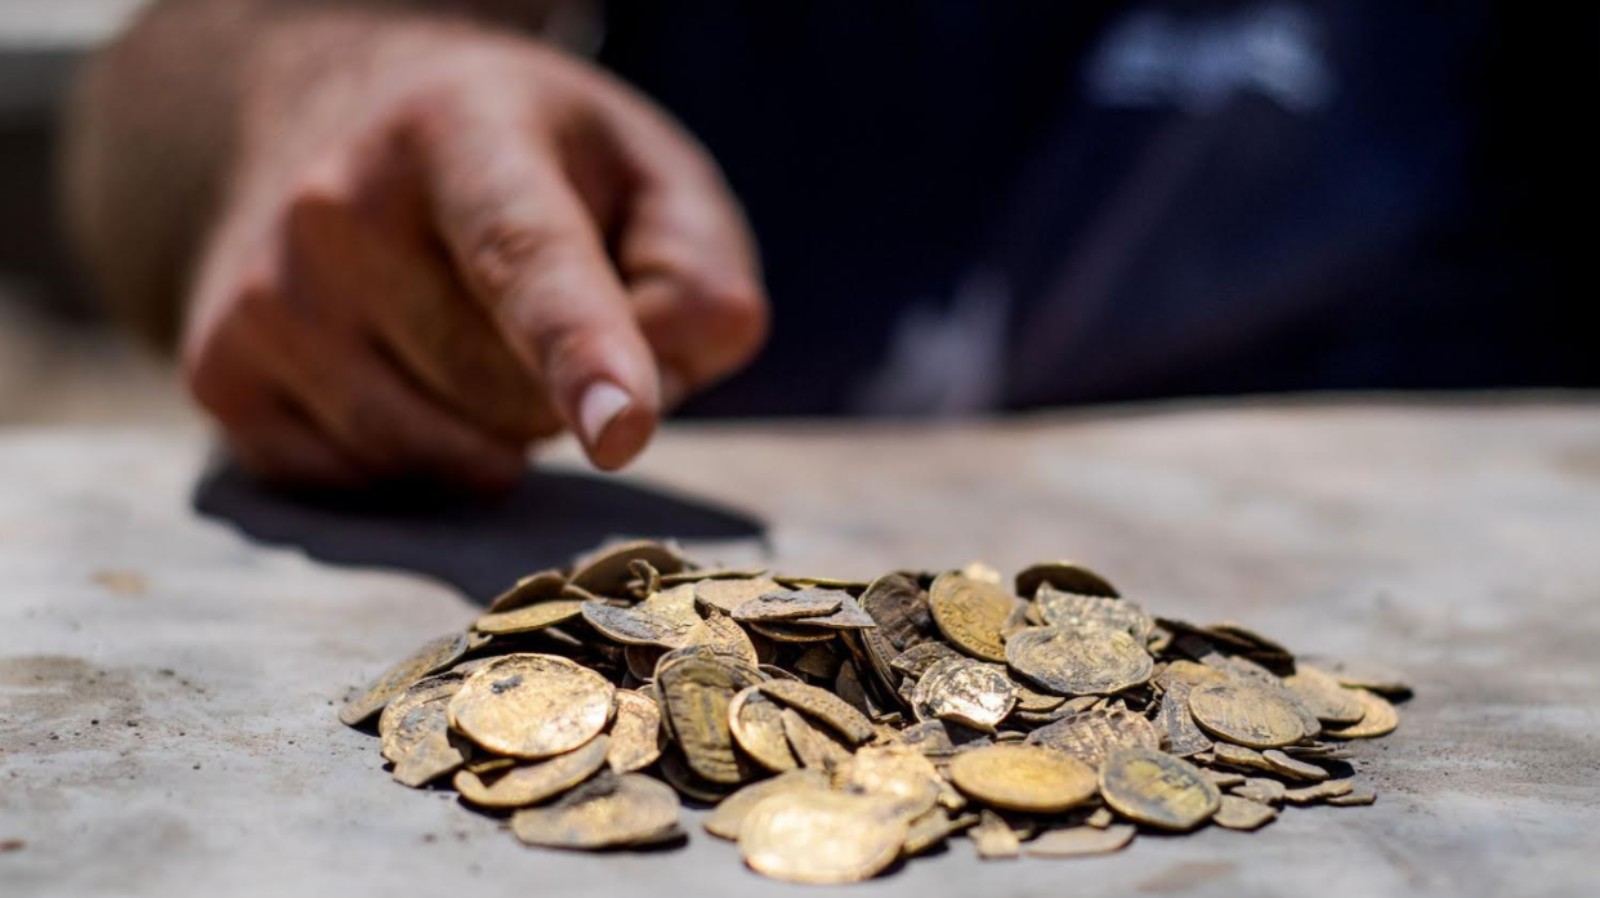 Pure gold coins in mint condition were recently unearthed in an undisclosed location in central Israel. Photo by Yoli Schwartz/Israel Antiquities Authority